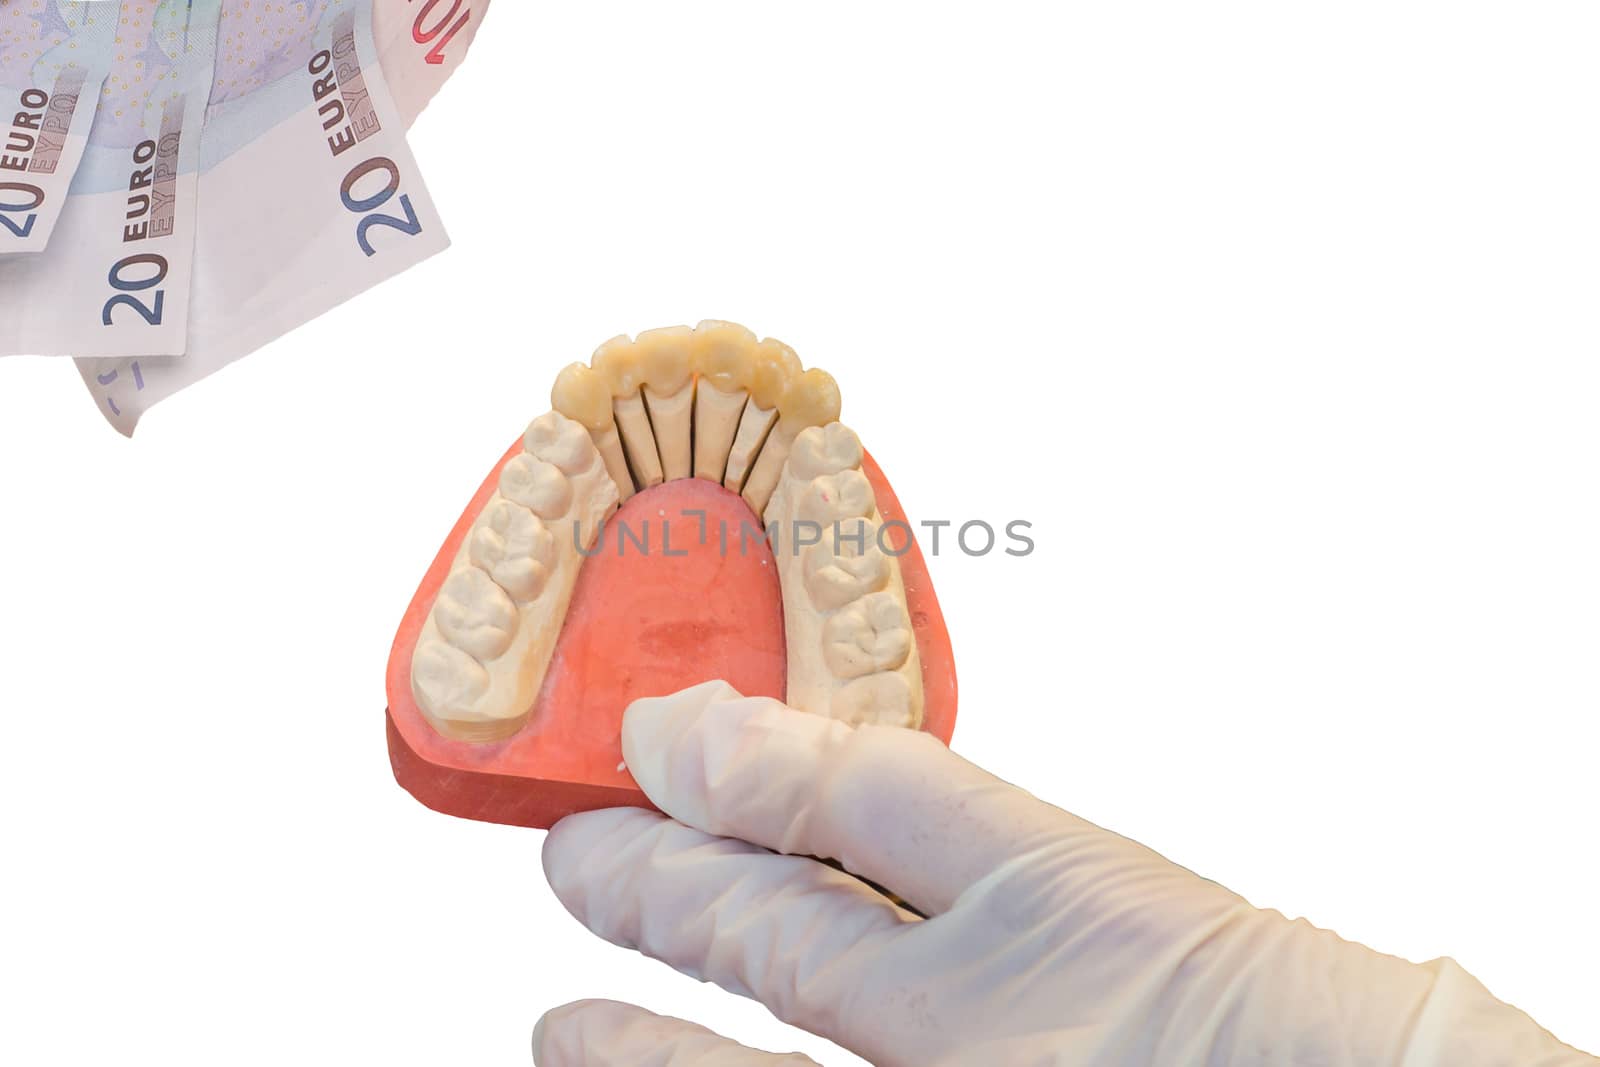 Denture and euro bills, a focus on the artificial teeth. Symbol of high dentures cost.